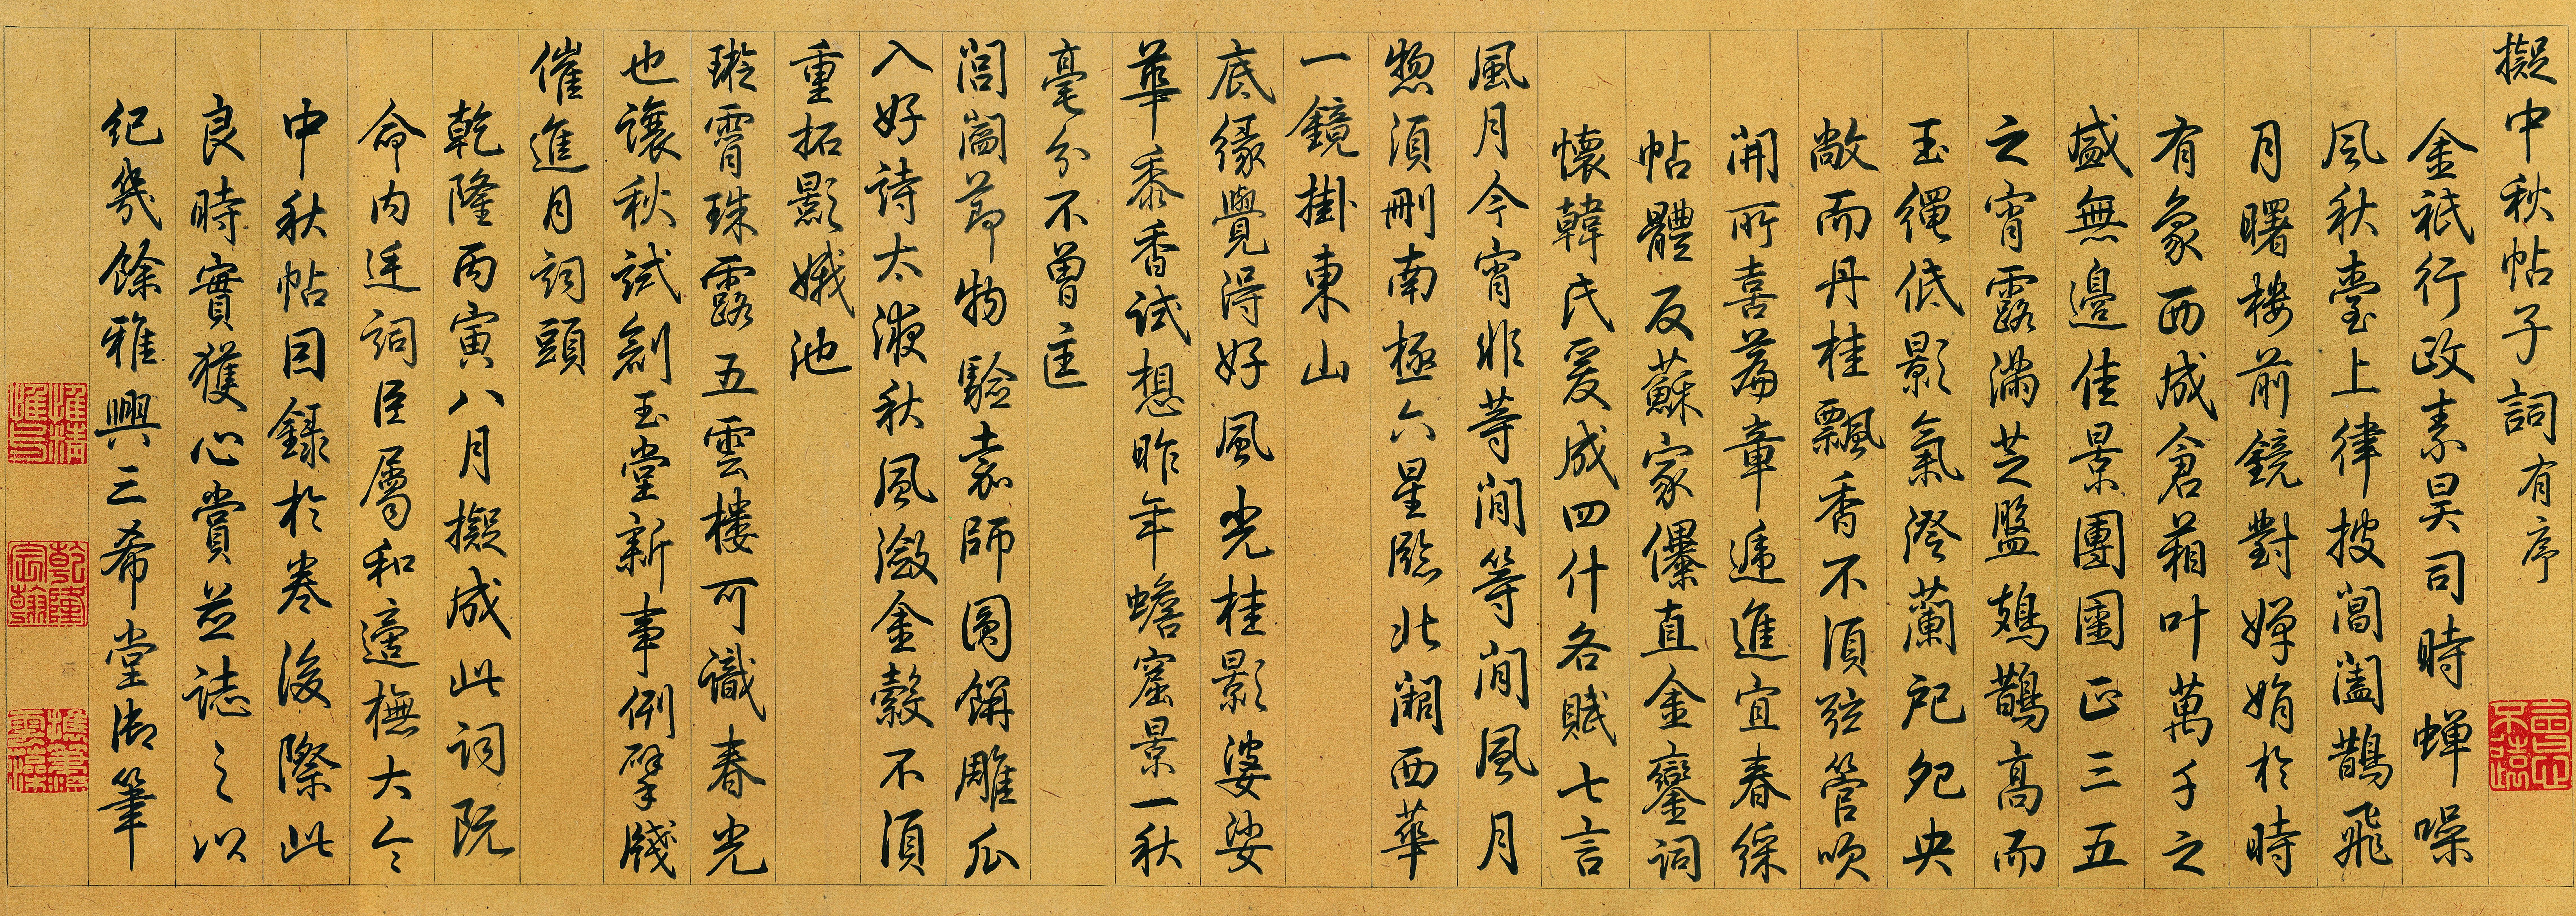 Calligraphy Chinese Characters 9135x3247